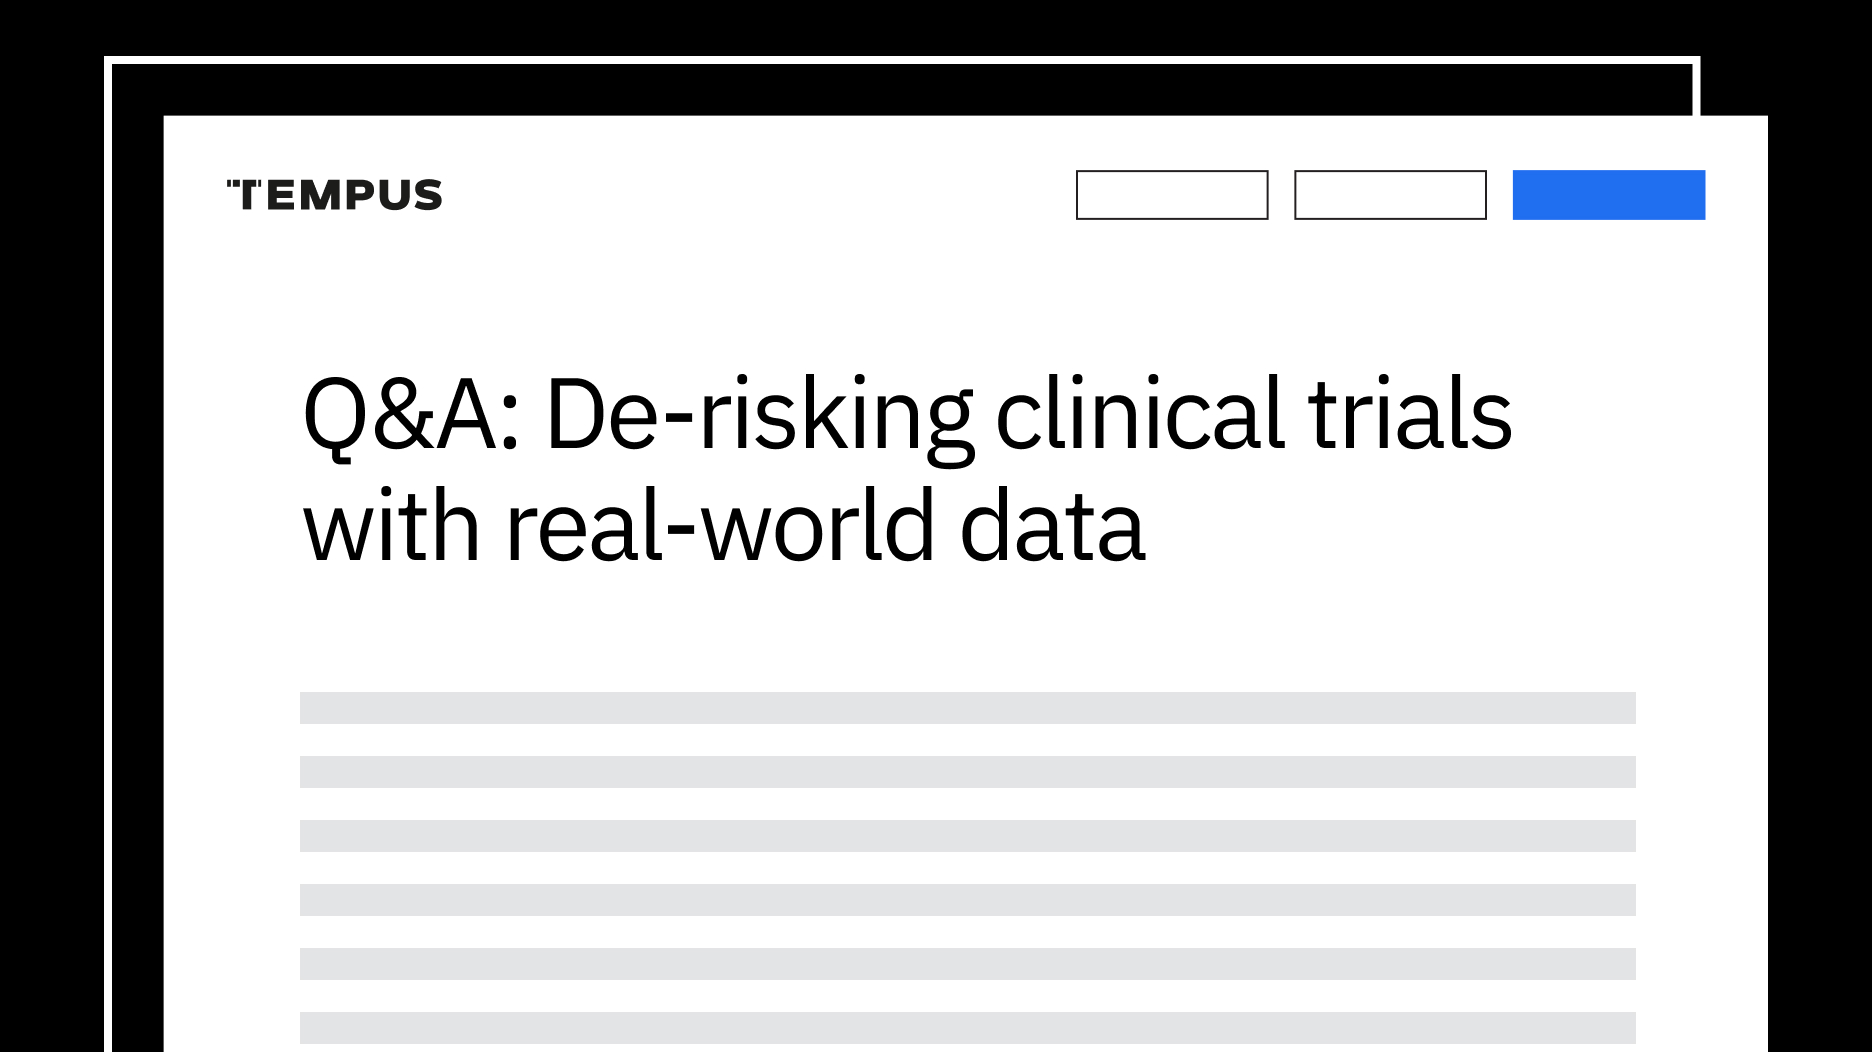 Q&A: De-risking clinical trials with real-world data